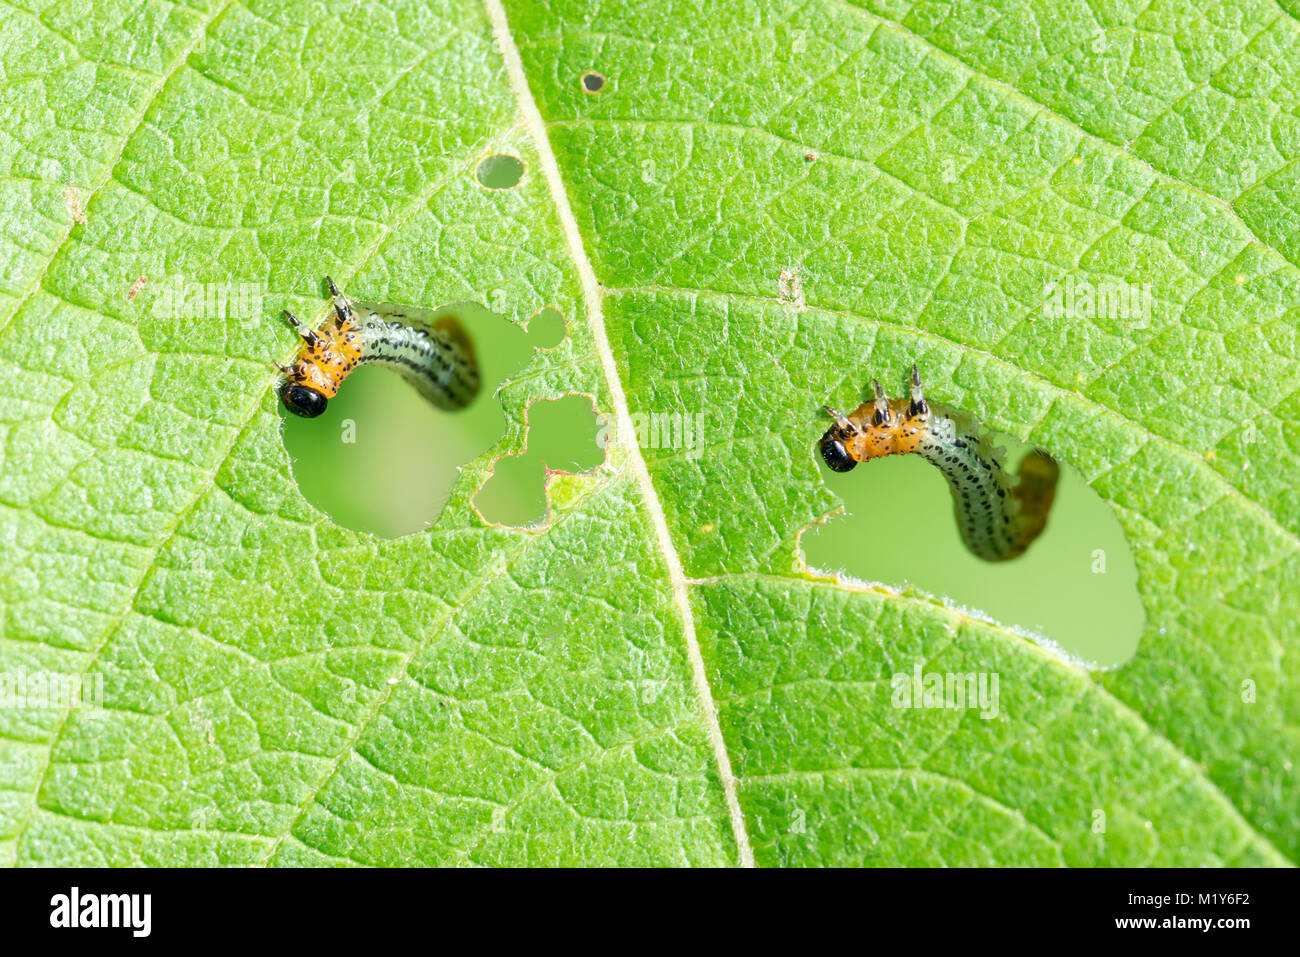 Caterpillars of Willow sawfly (Nematus salicis), eating leaves of a Willow (leaf), Lower Saxony, Germany Stock Photo